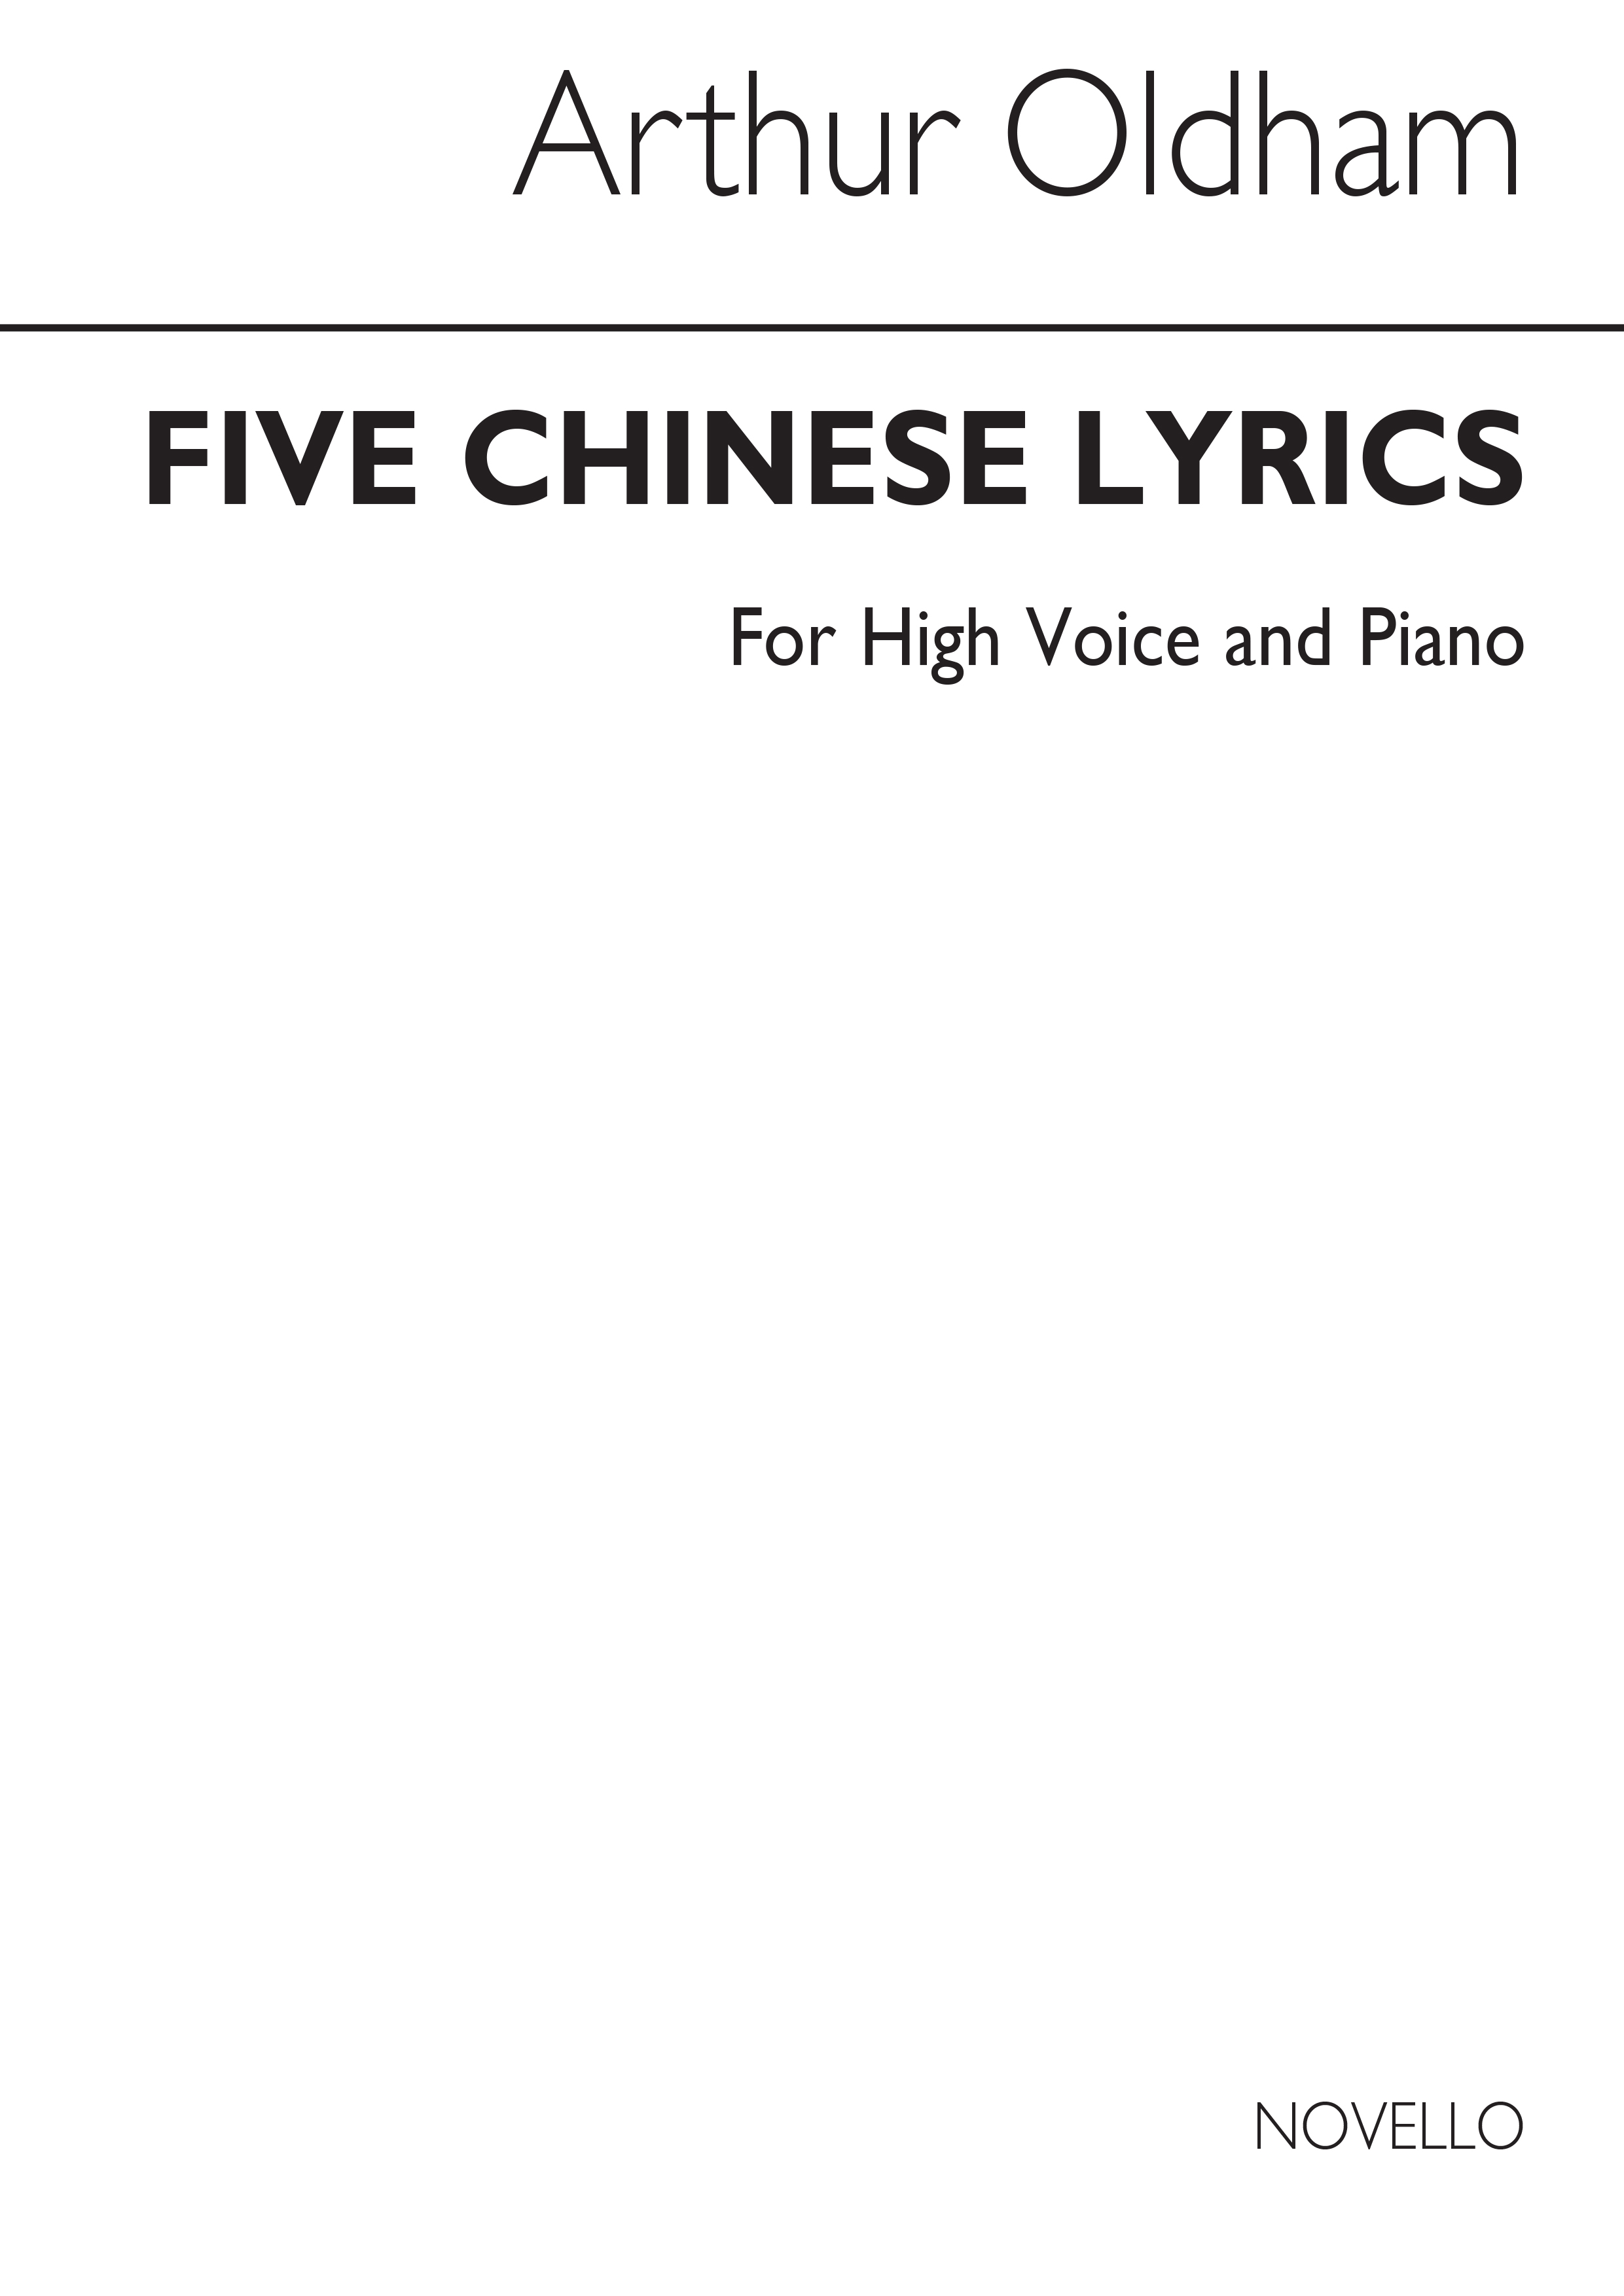 Oldham: Five Chinese Lyrics for High Voice with Piano acc.